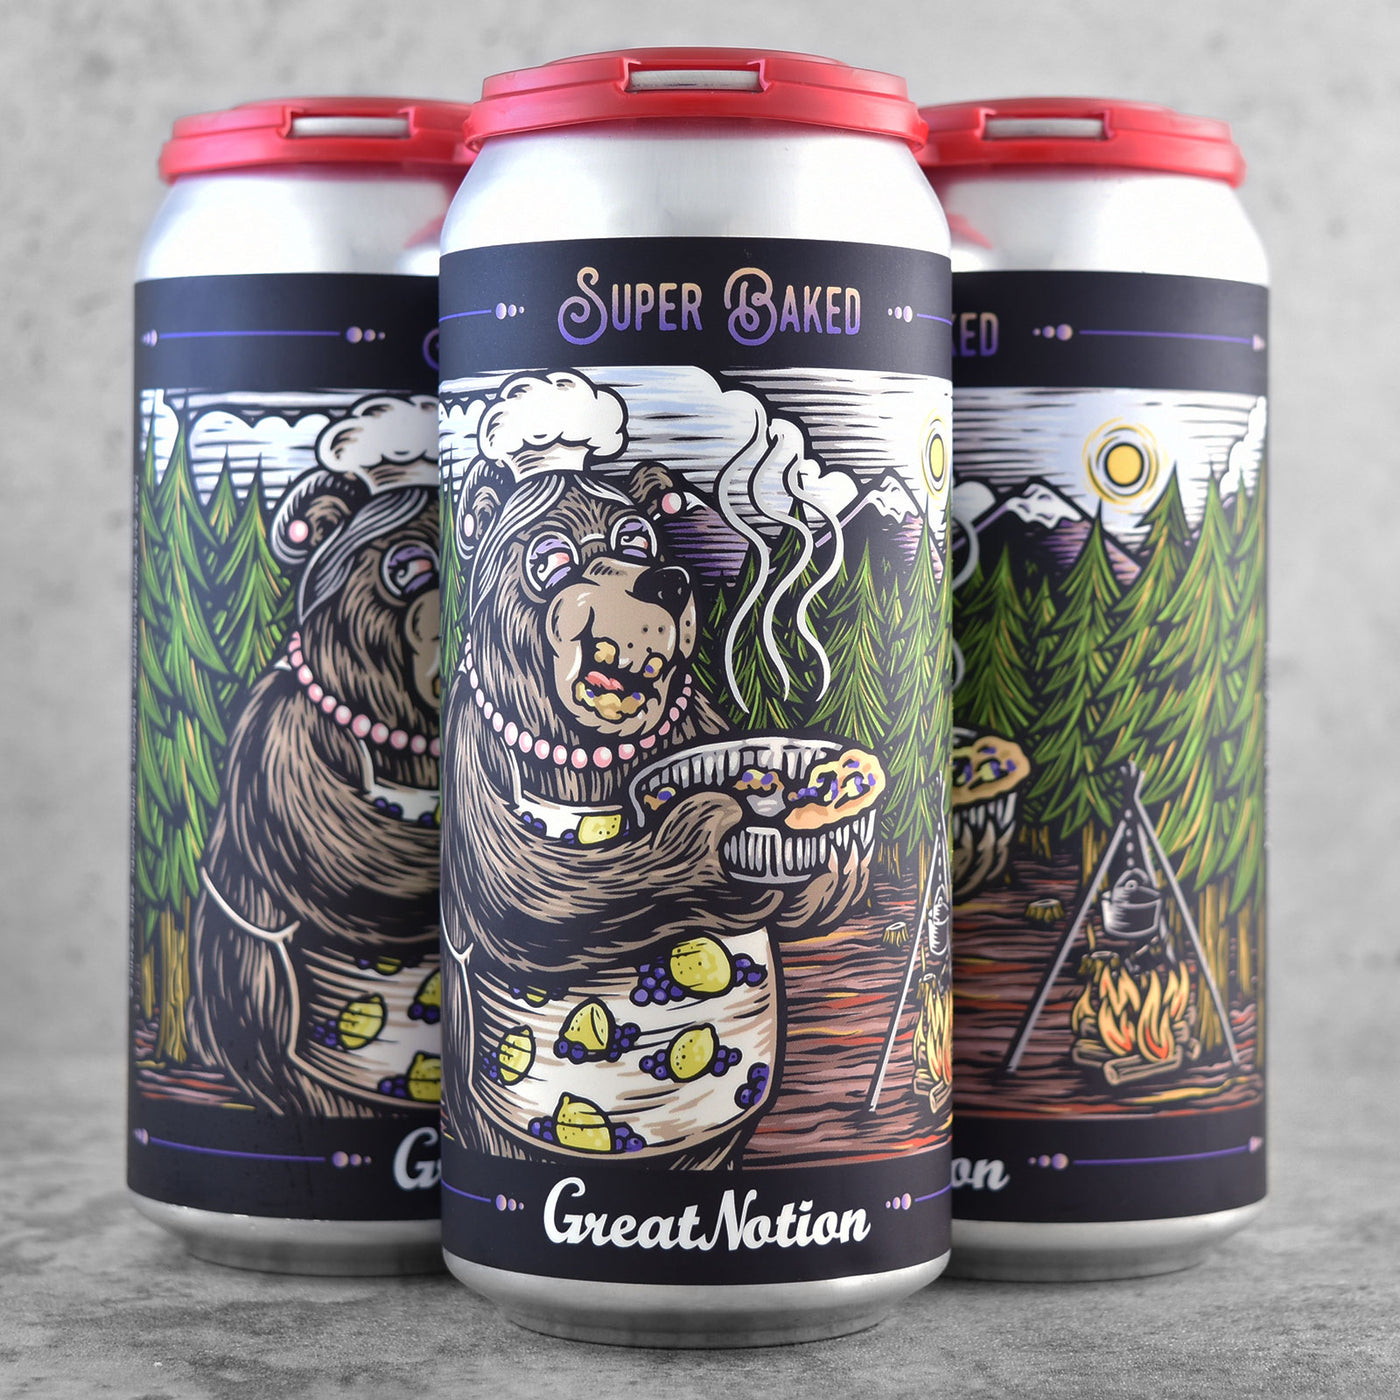 Great Notion Super Baked